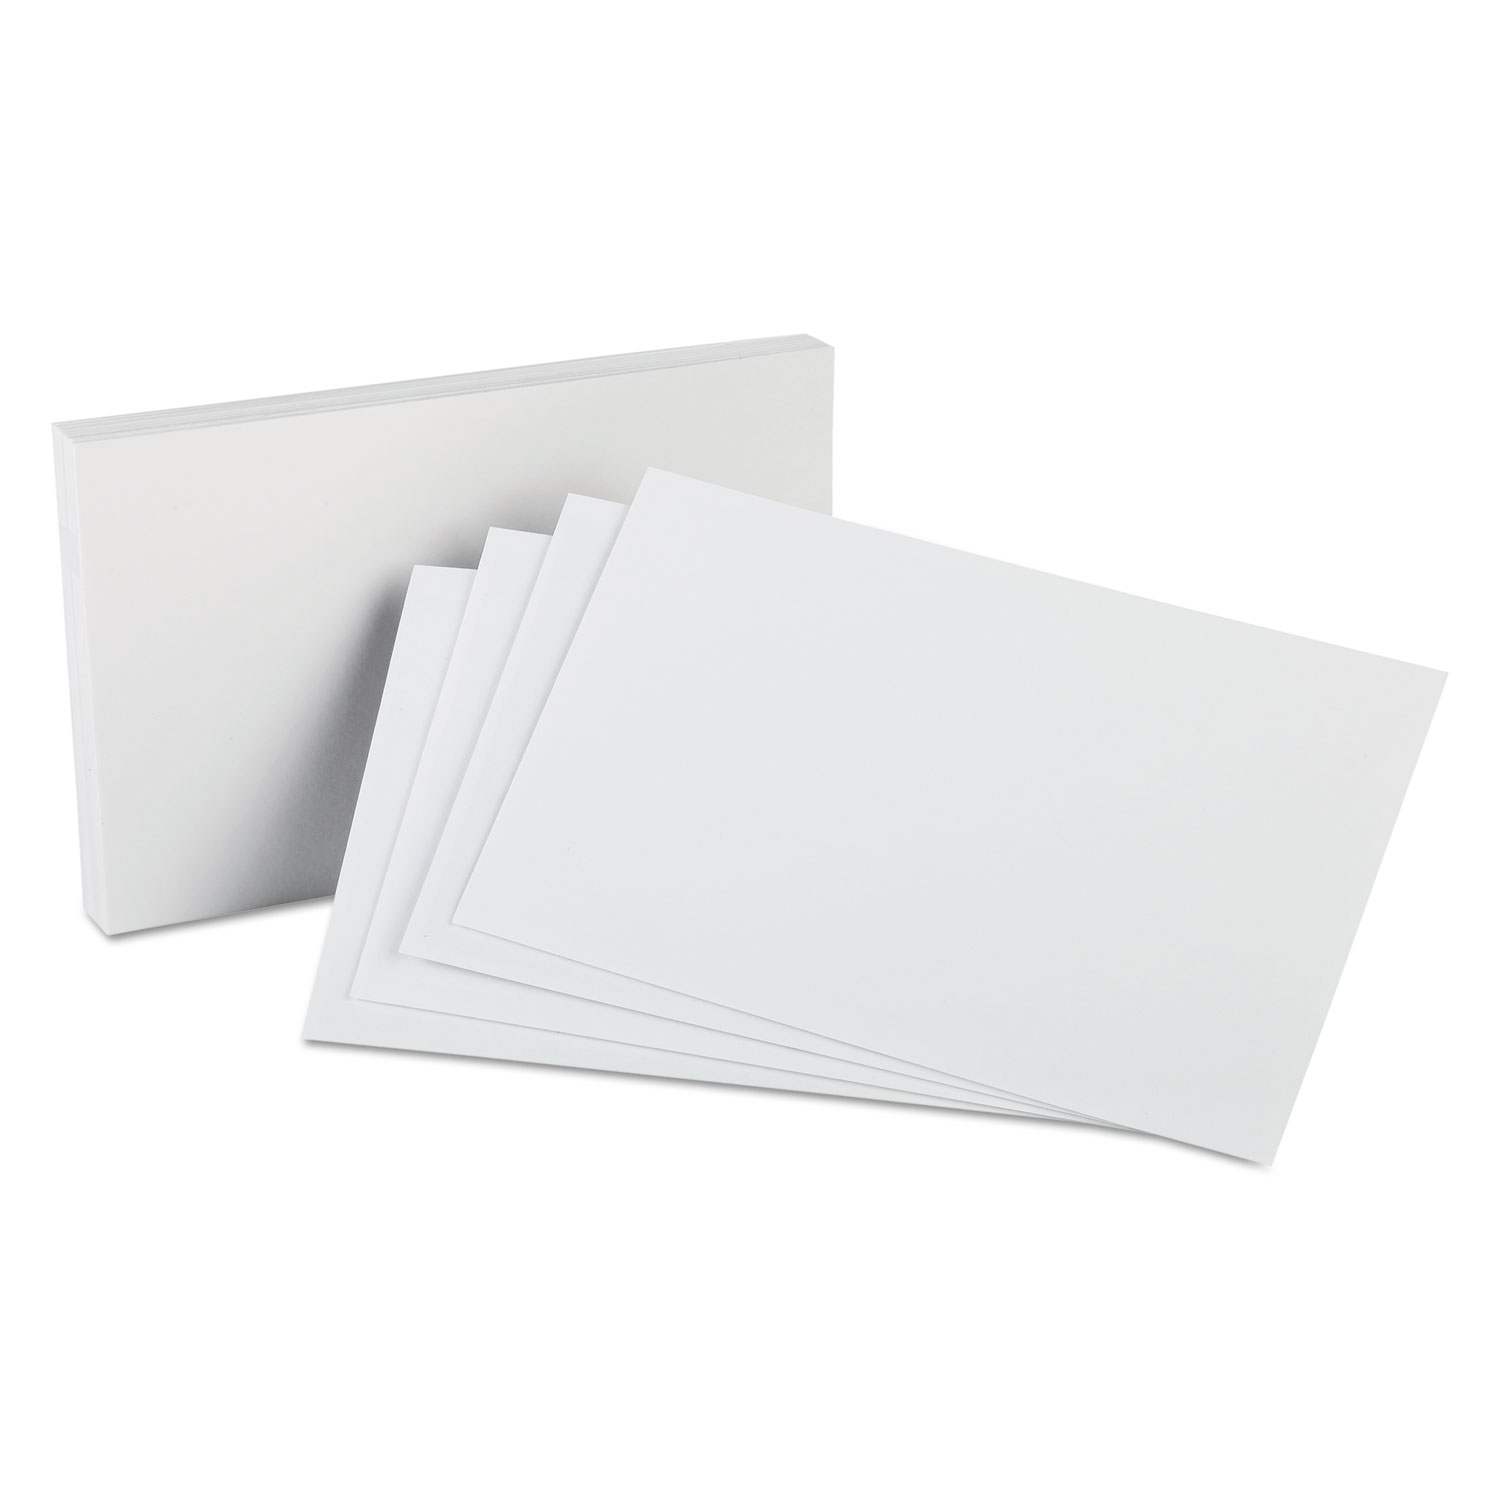  Oxford 50EE Unruled Index Cards, 5 x 8, White, 100/Pack (OXF50) 